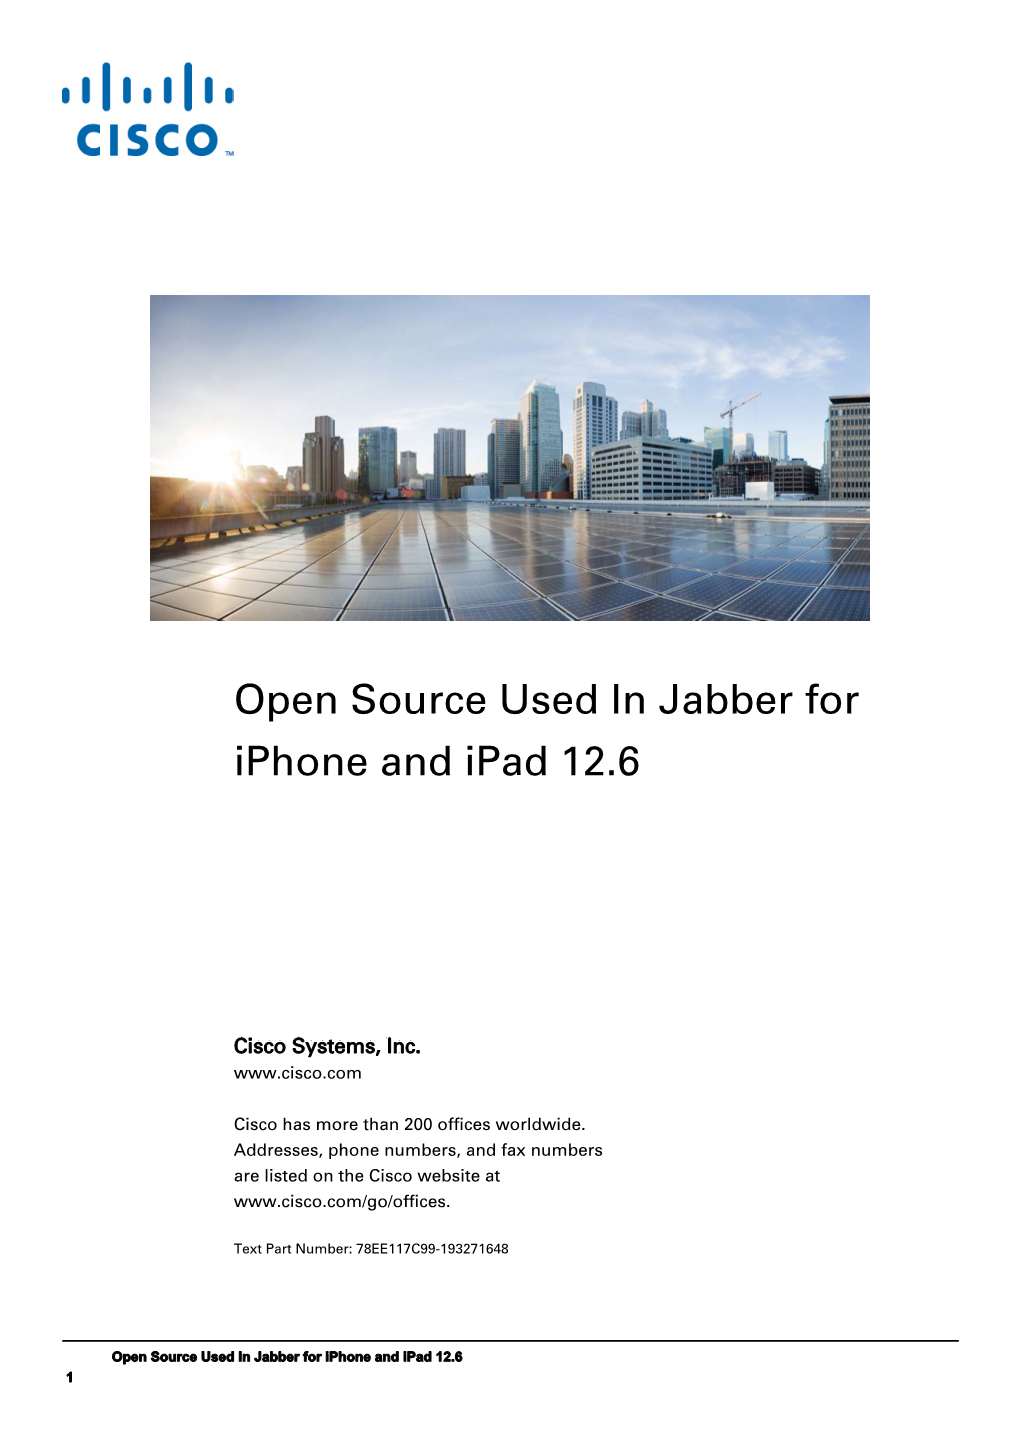 Licensing Information for Cisco Jabber for Iphone and Ipad 12.6